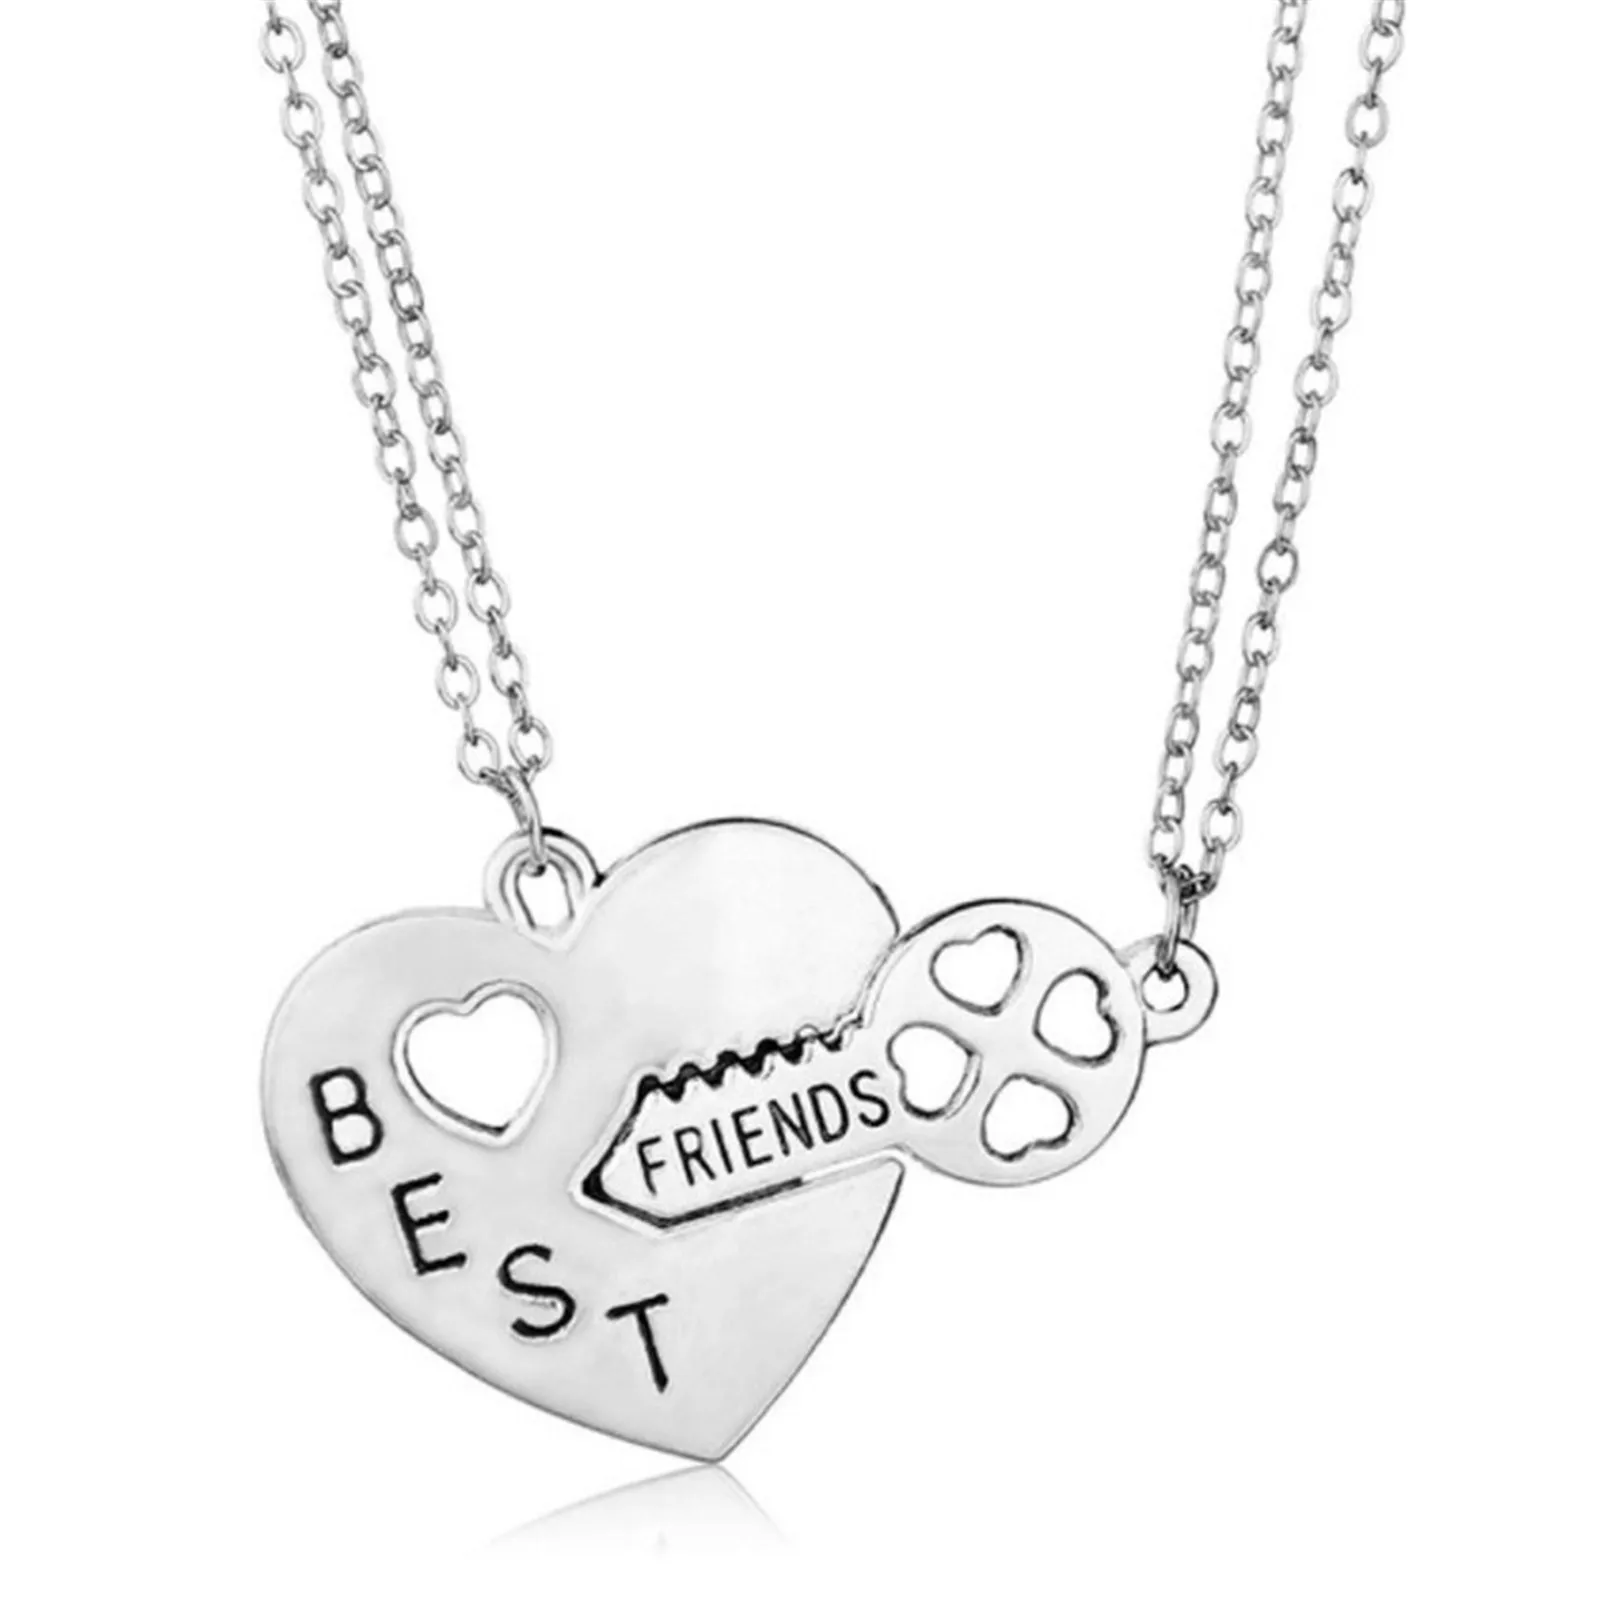 Bff Necklace: Over 97 Royalty-Free Licensable Stock Illustrations & Drawings  | Shutterstock